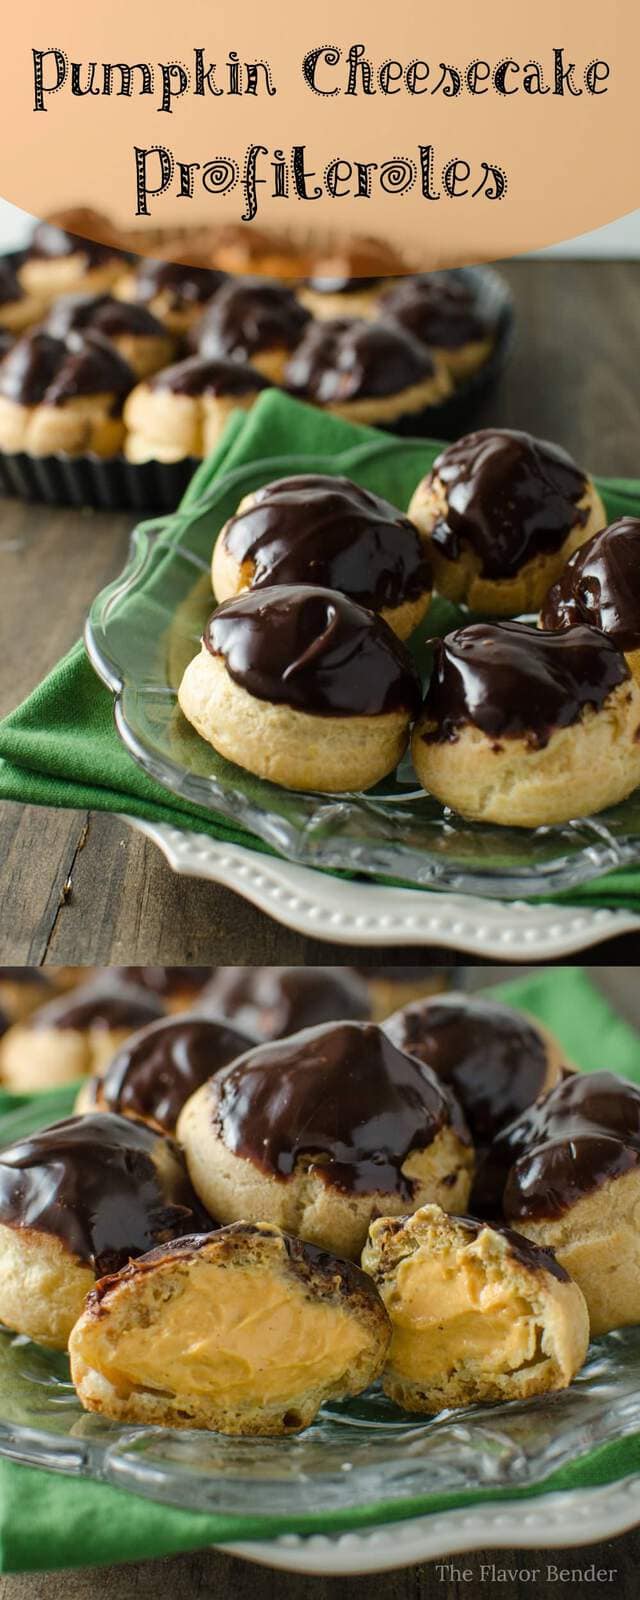 Pumpkin Cheesecake Profiteroles - Bitesized Profiteroles filled with creamy Pumpkin Cheesecake filling and a chocolate glaze. Perfect for Fall and for thanksgiving!